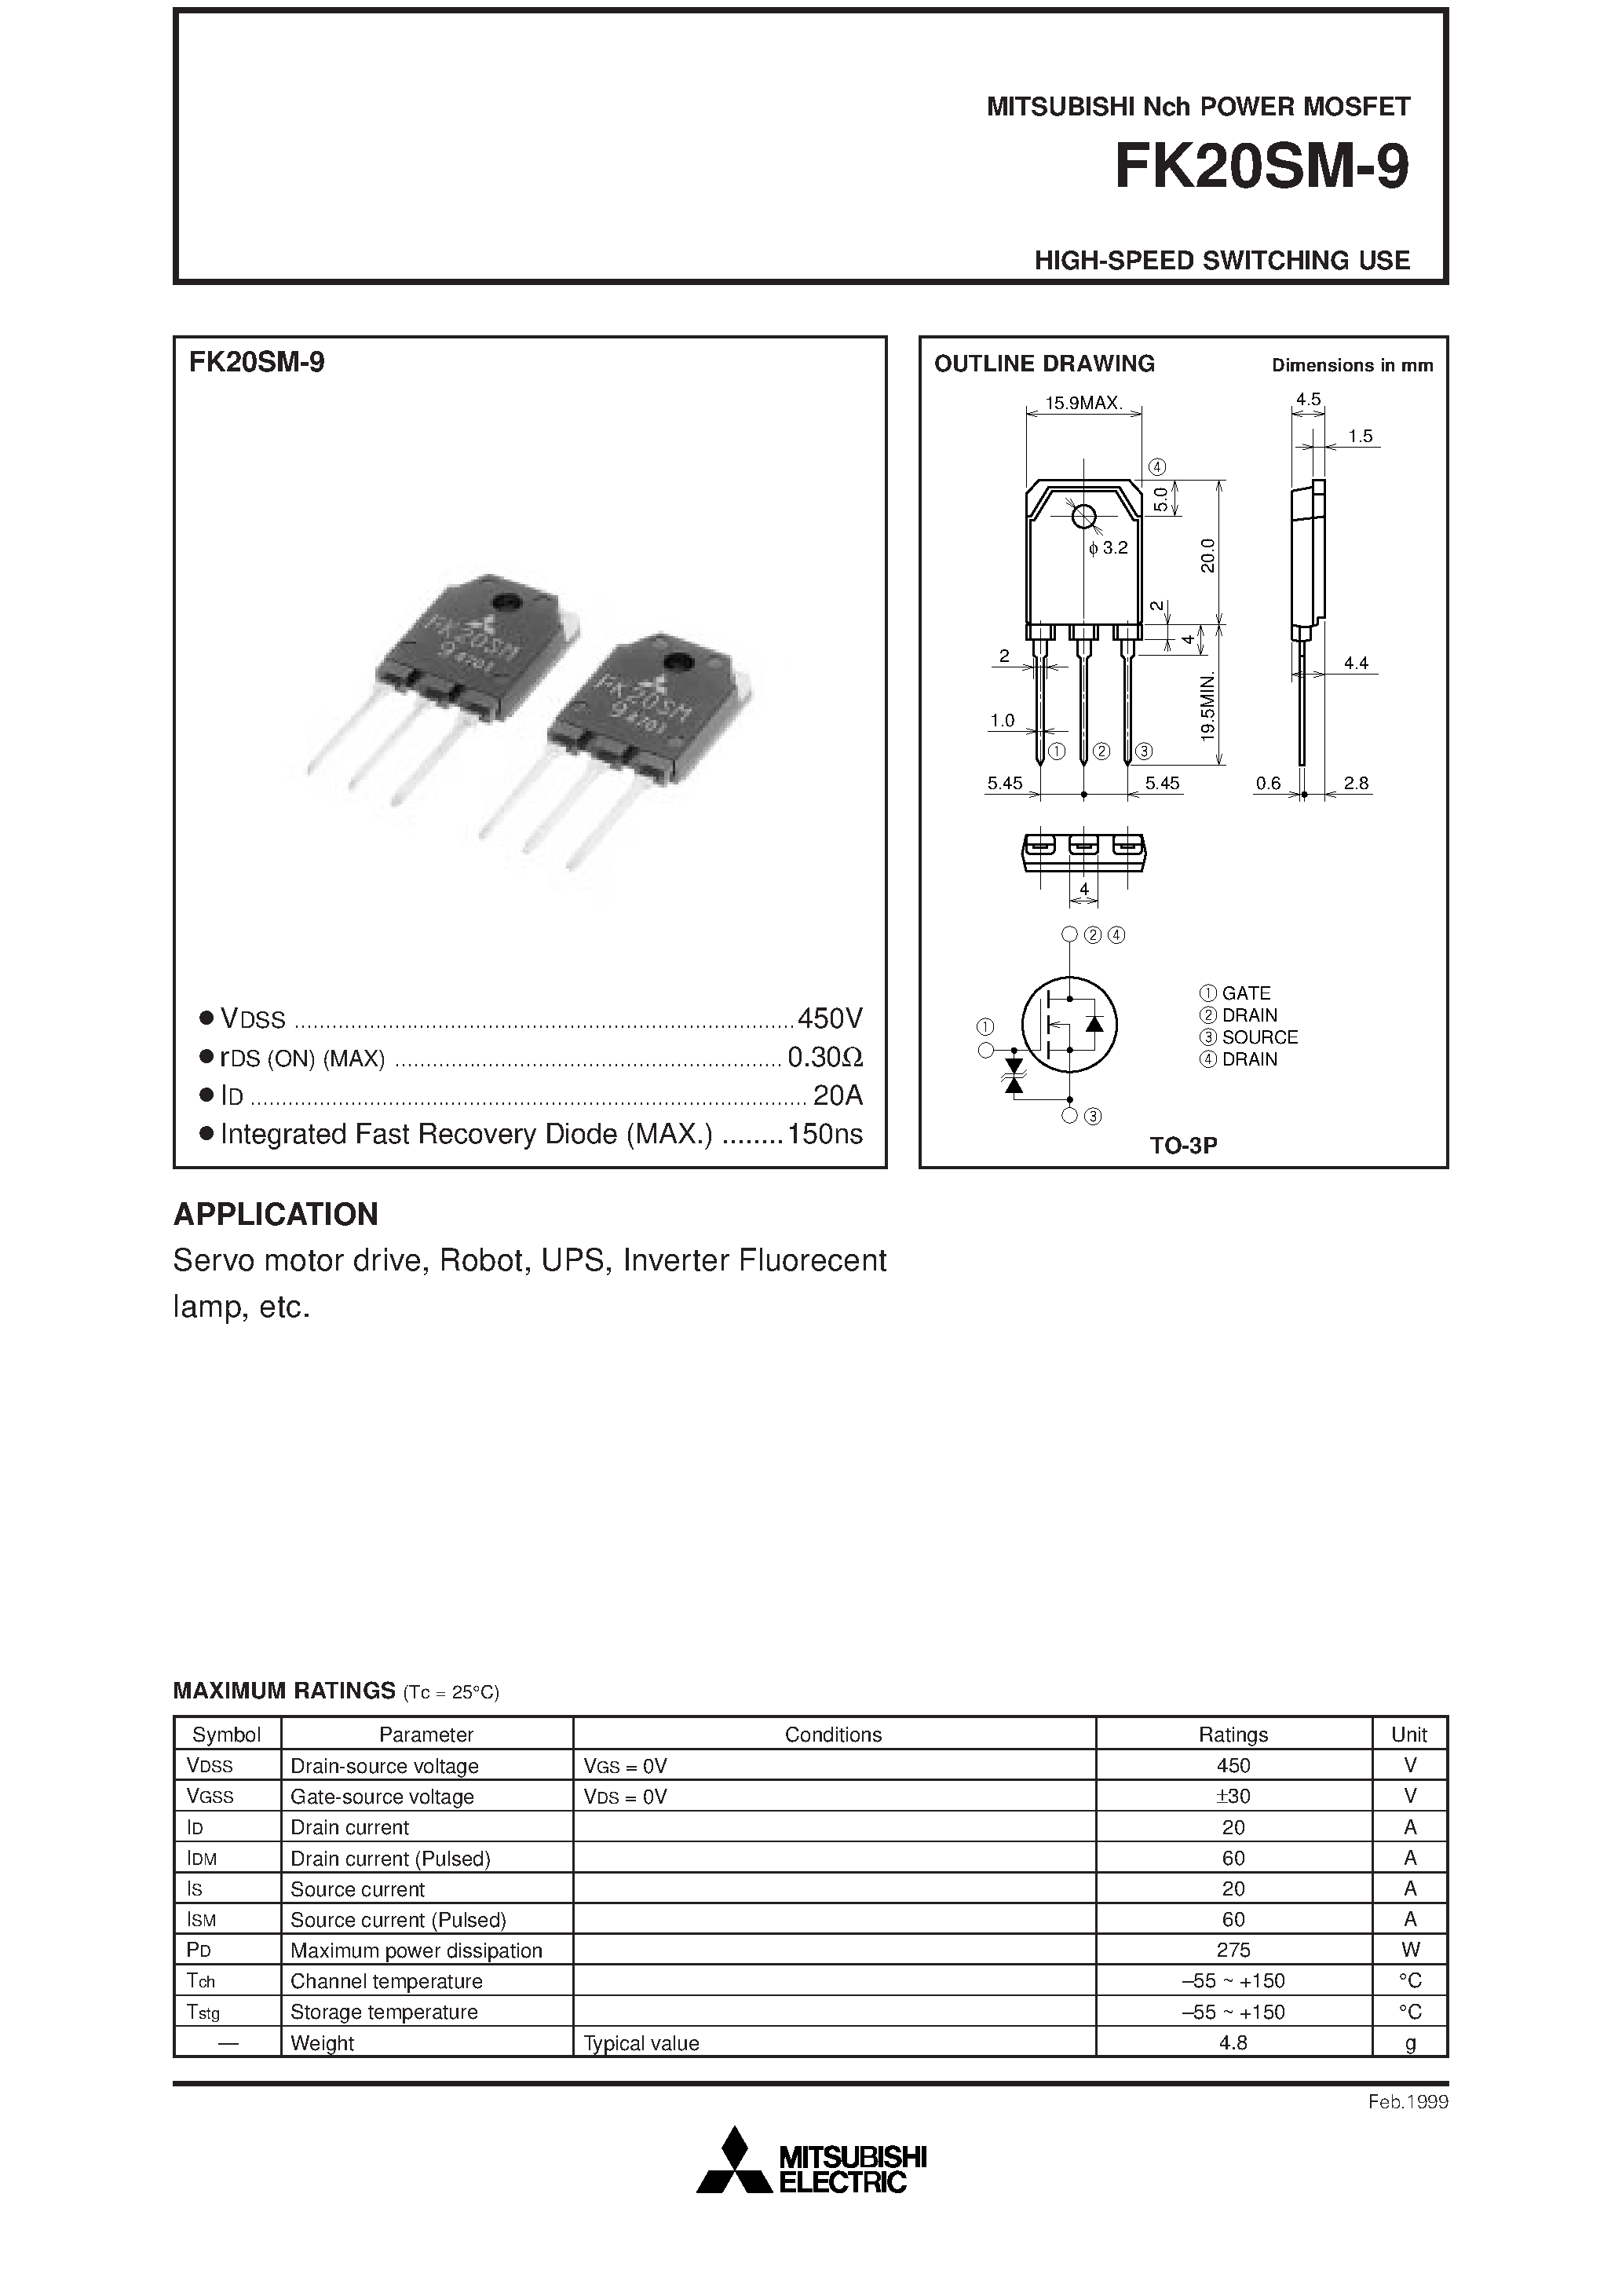 Datasheet FK20SM-9 - Nch POWER MOSFET HIGH-SPEED SWITCHING USE page 1